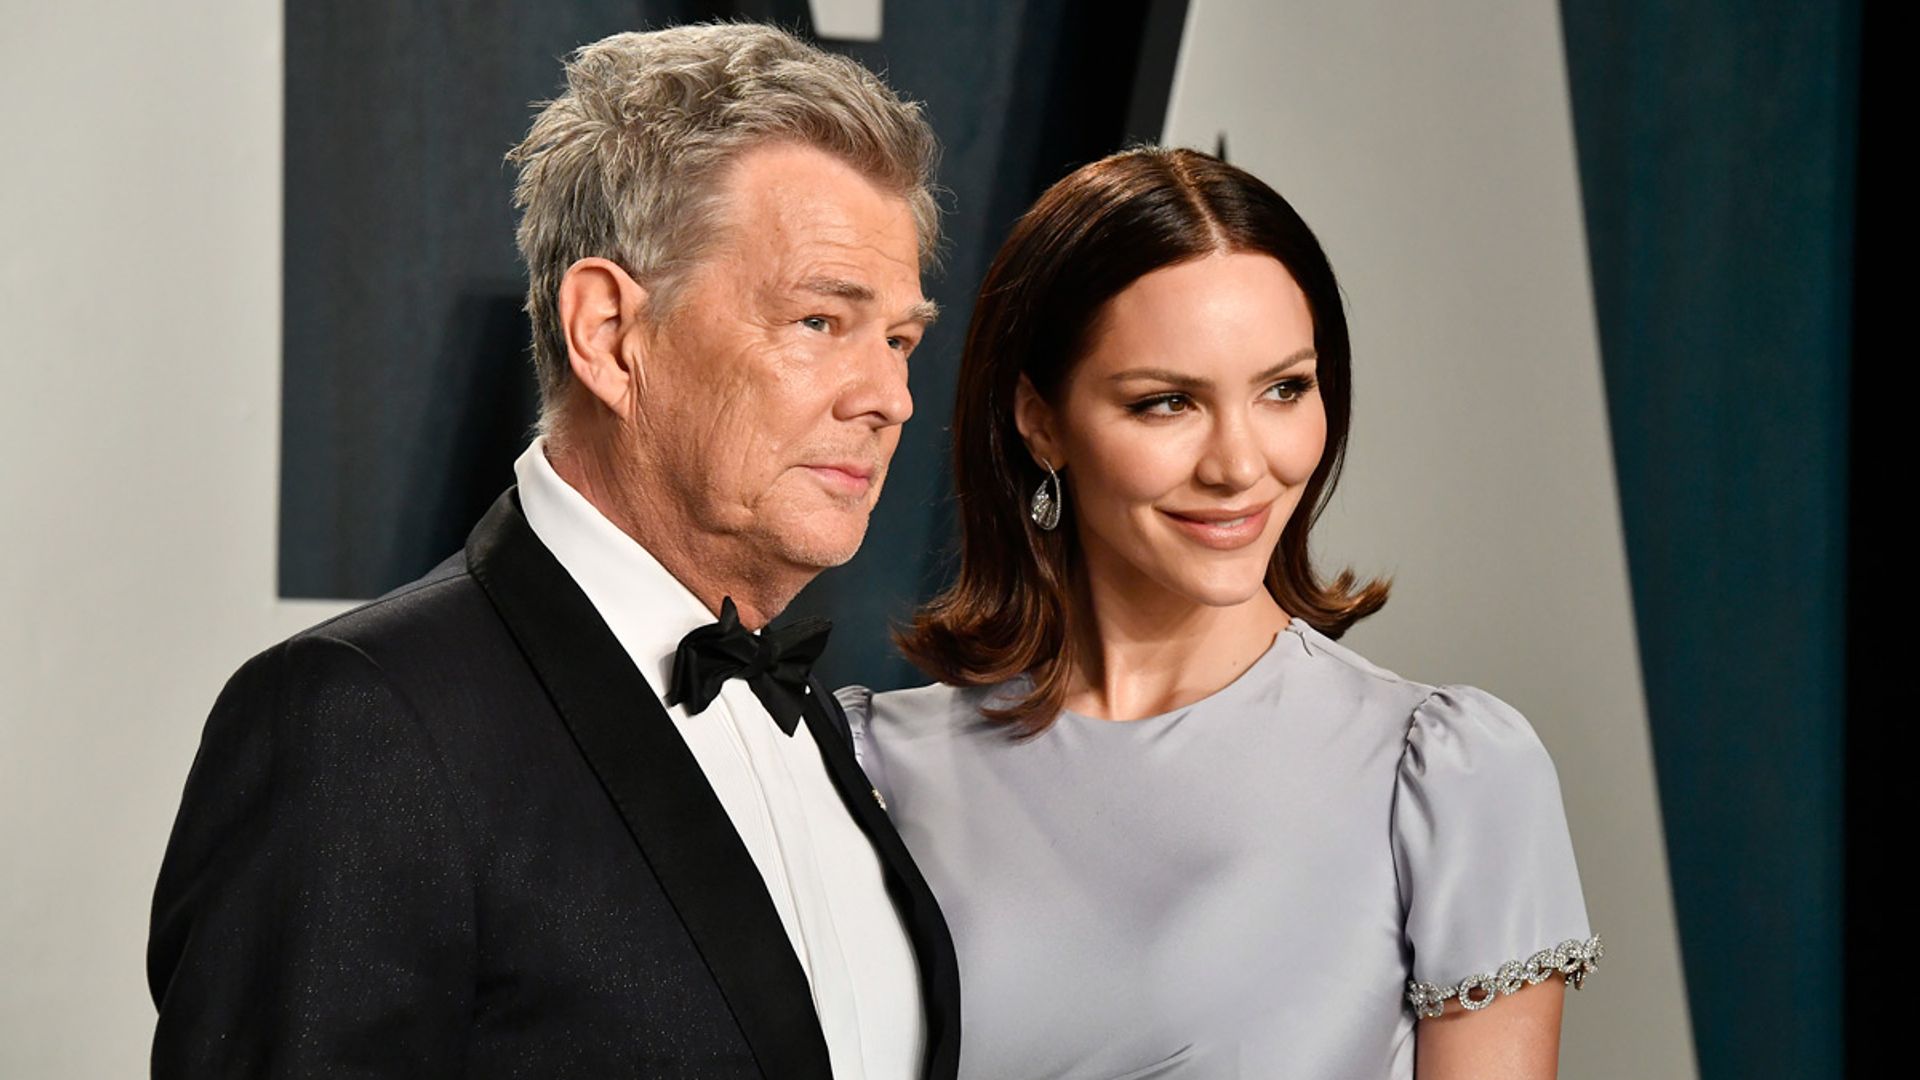 Katharine McPhee finally shows face of her baby son with David Foster!